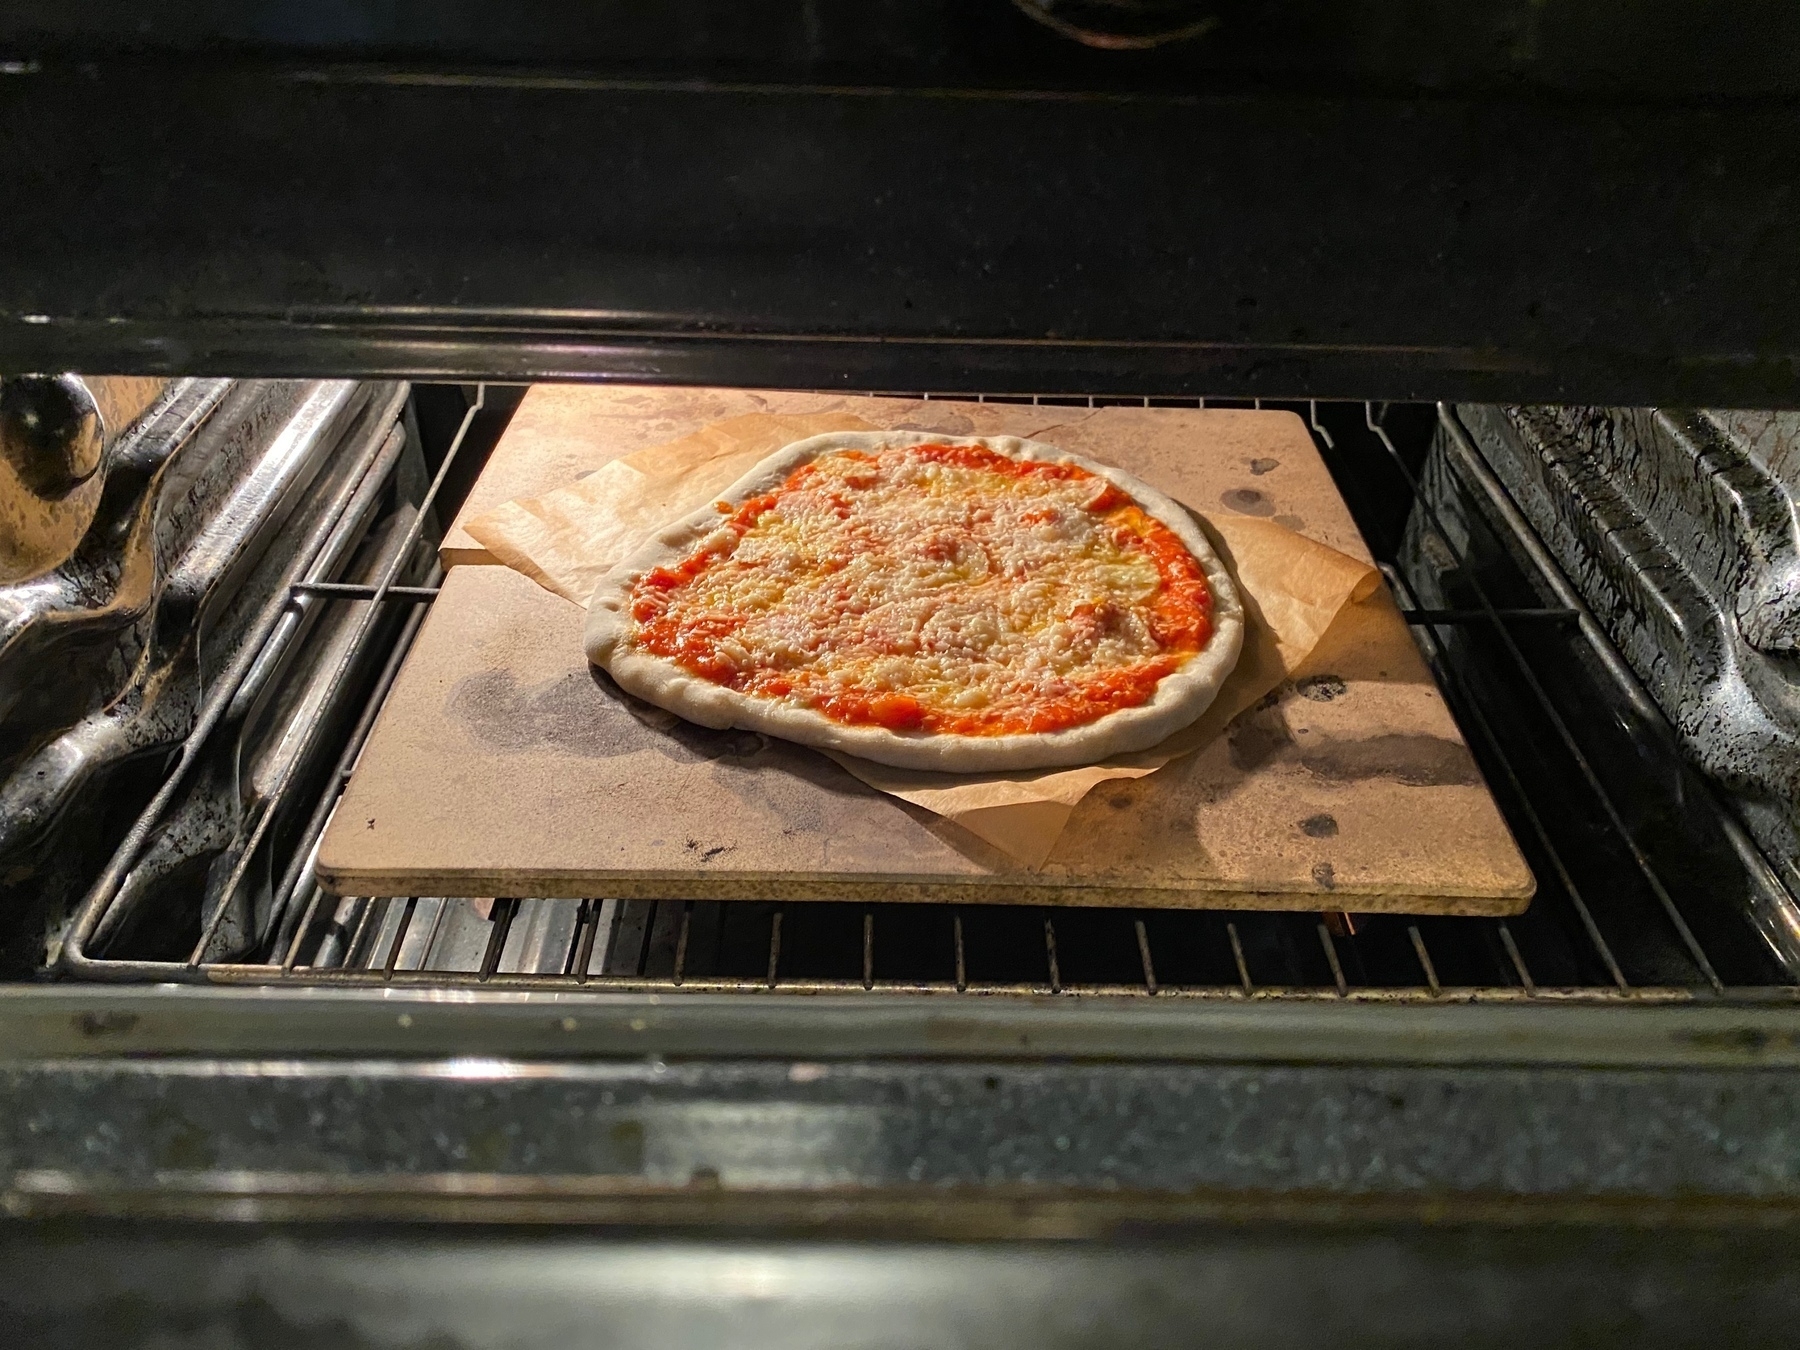 Small uncooked pizza on a baking stone in an open oven.